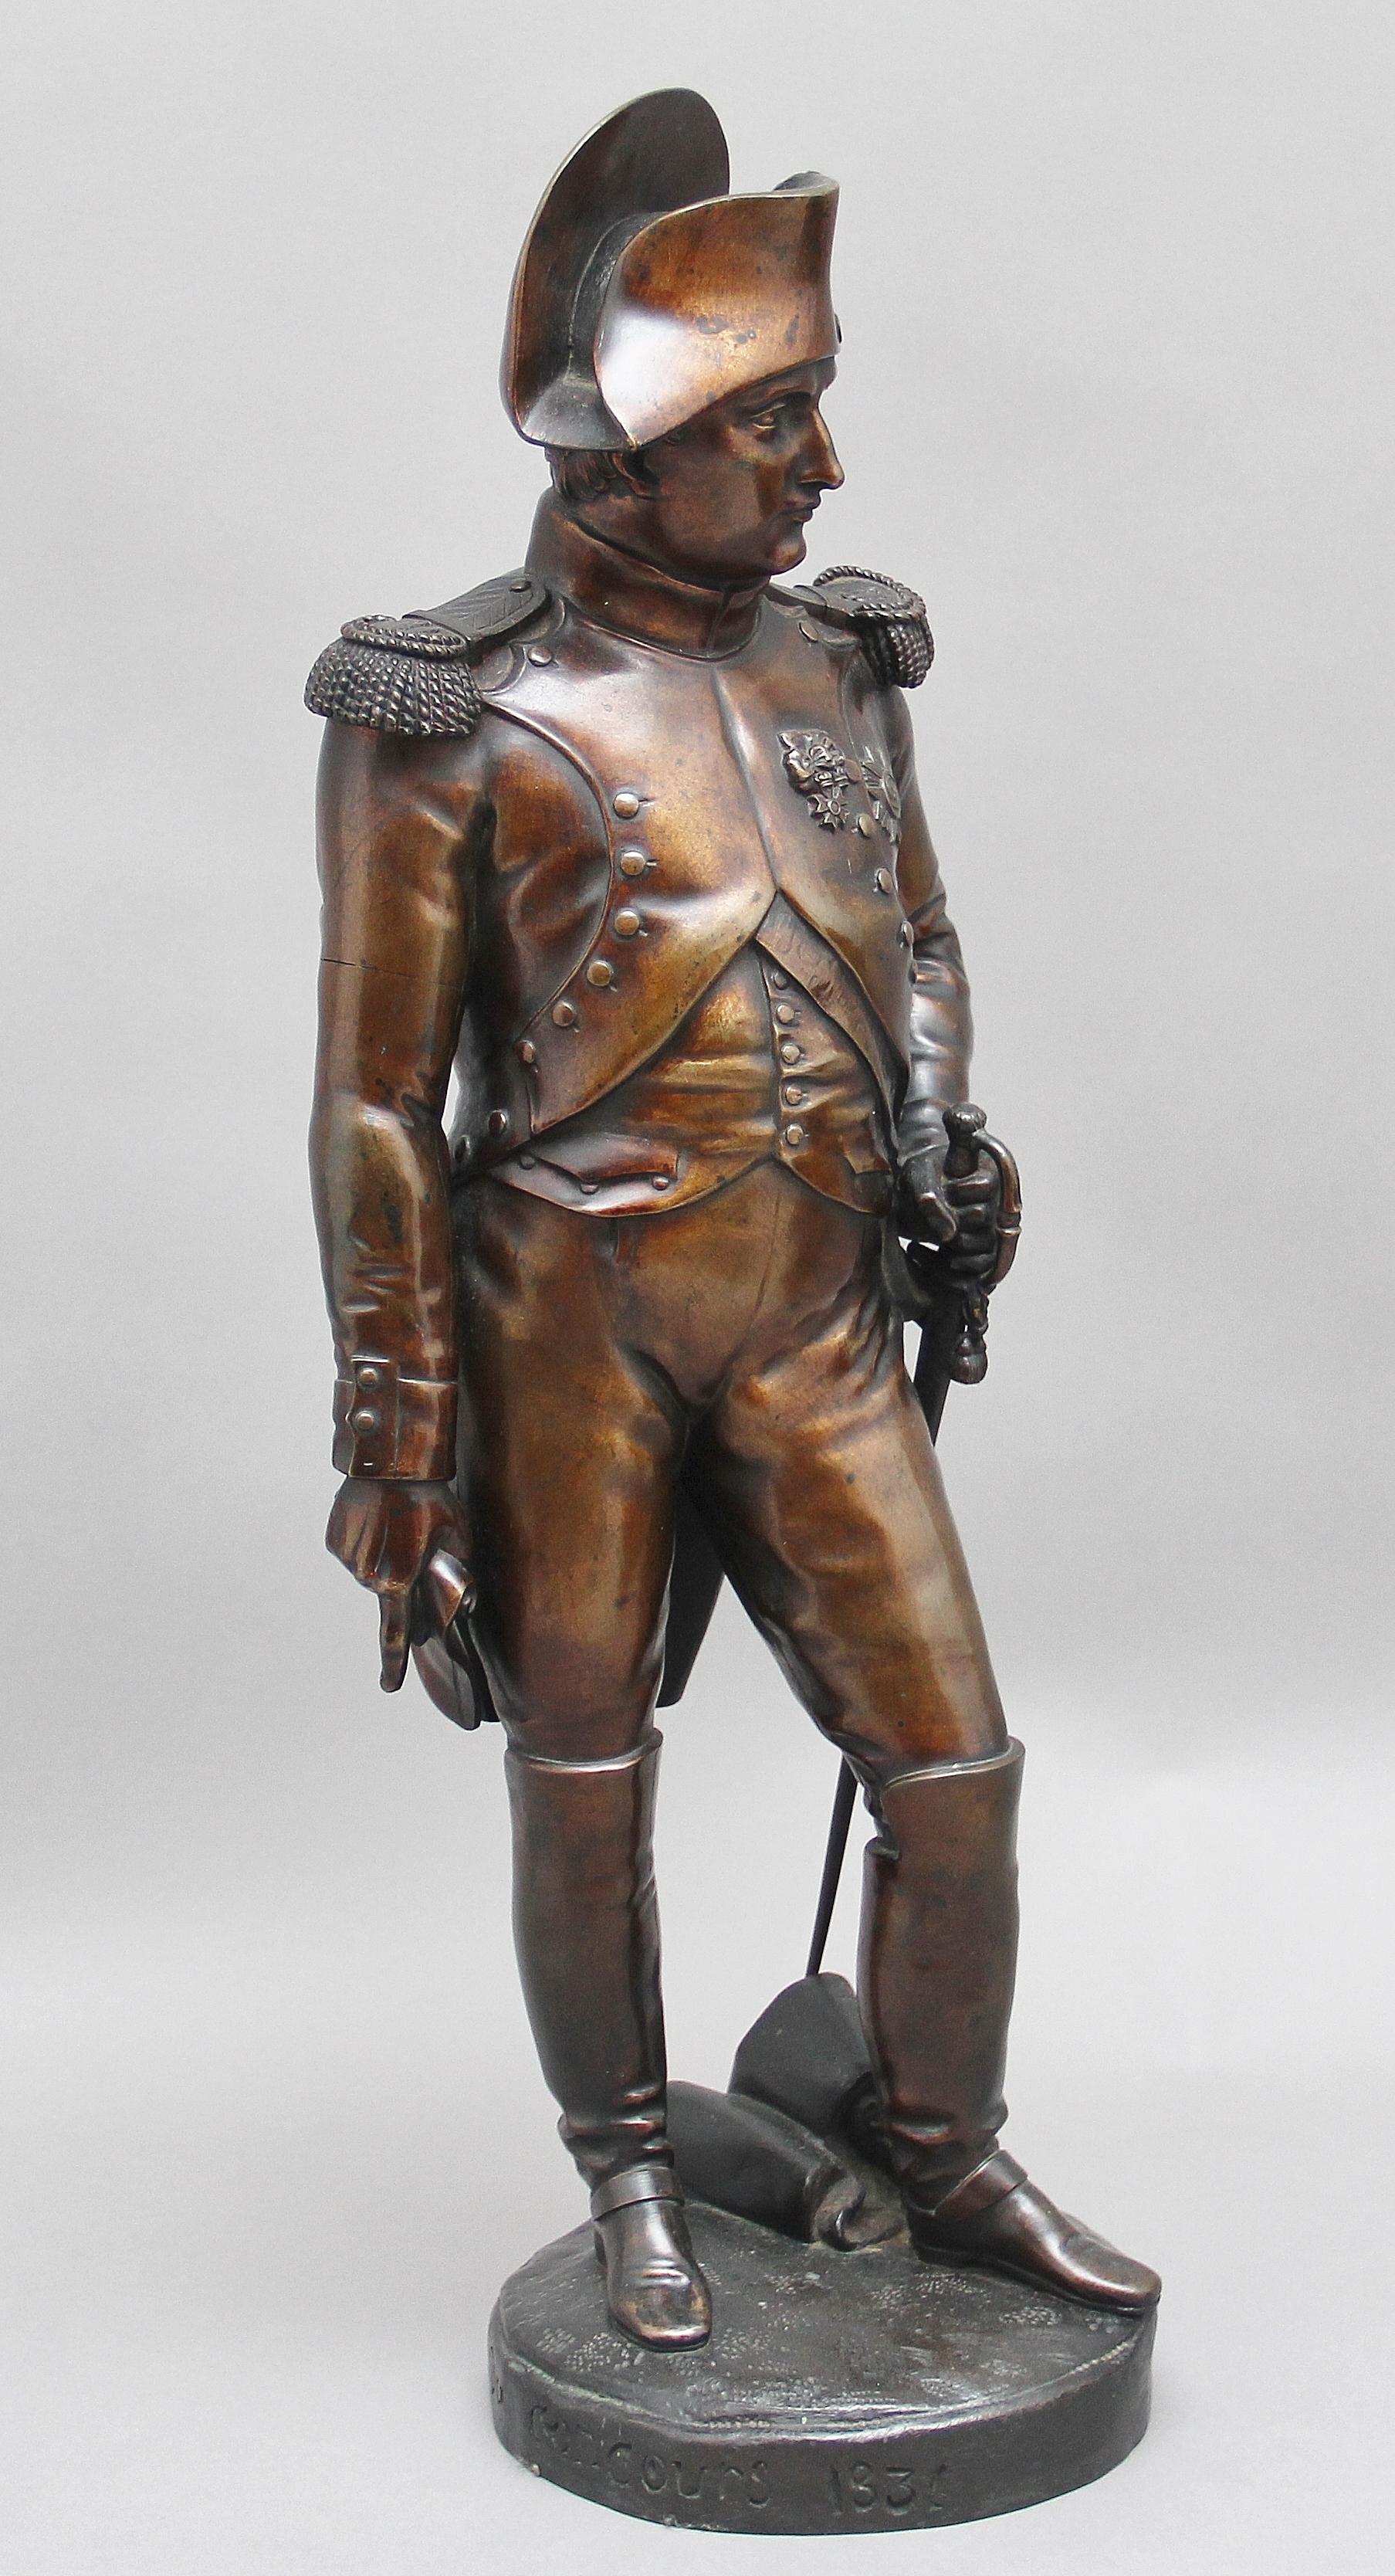 Early 19th century French bronze sculpture of Napoleon Bonaparte by Carle Elshoecht (1797-1856) and is dated and signed 1831.

This bronze has a fabulous patina and is in excellent condition, standing in uniform wearing a bicorn hat, waistcoat and